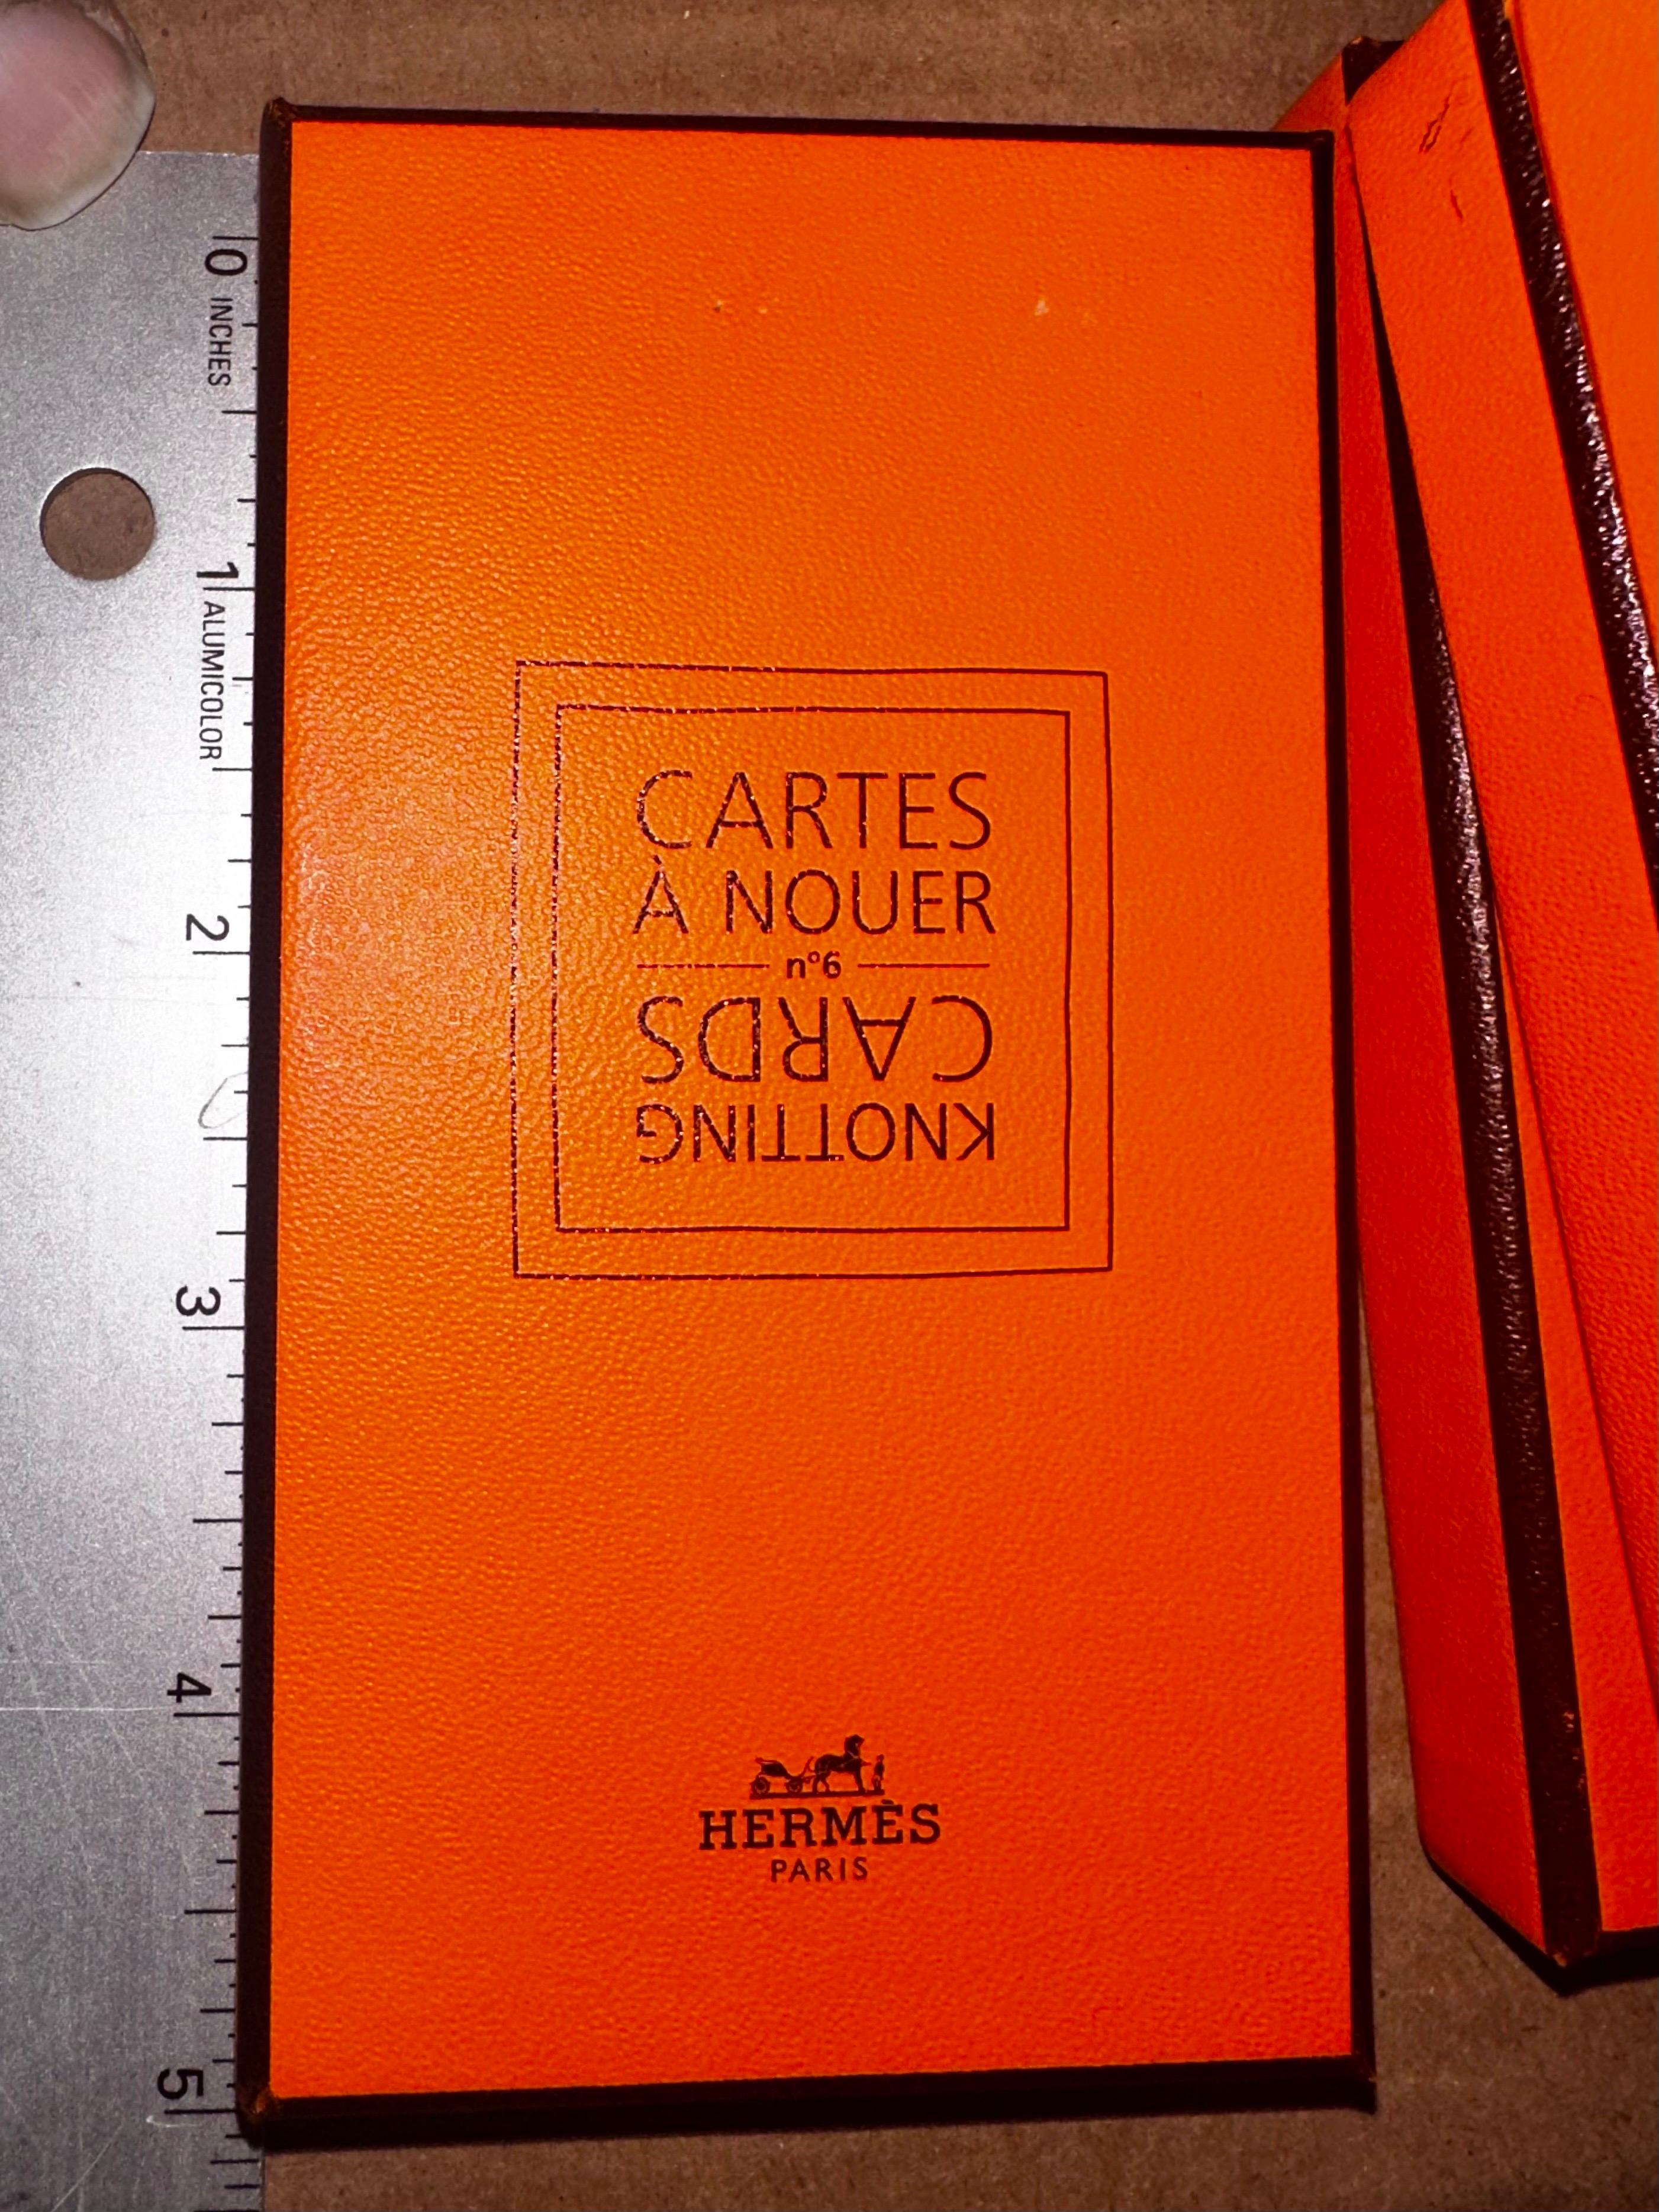 Hermés Cartes A Nouer, Scarf Knotting How-To Card Set, New in Box, France  In Excellent Condition For Sale In Brooklyn, NY